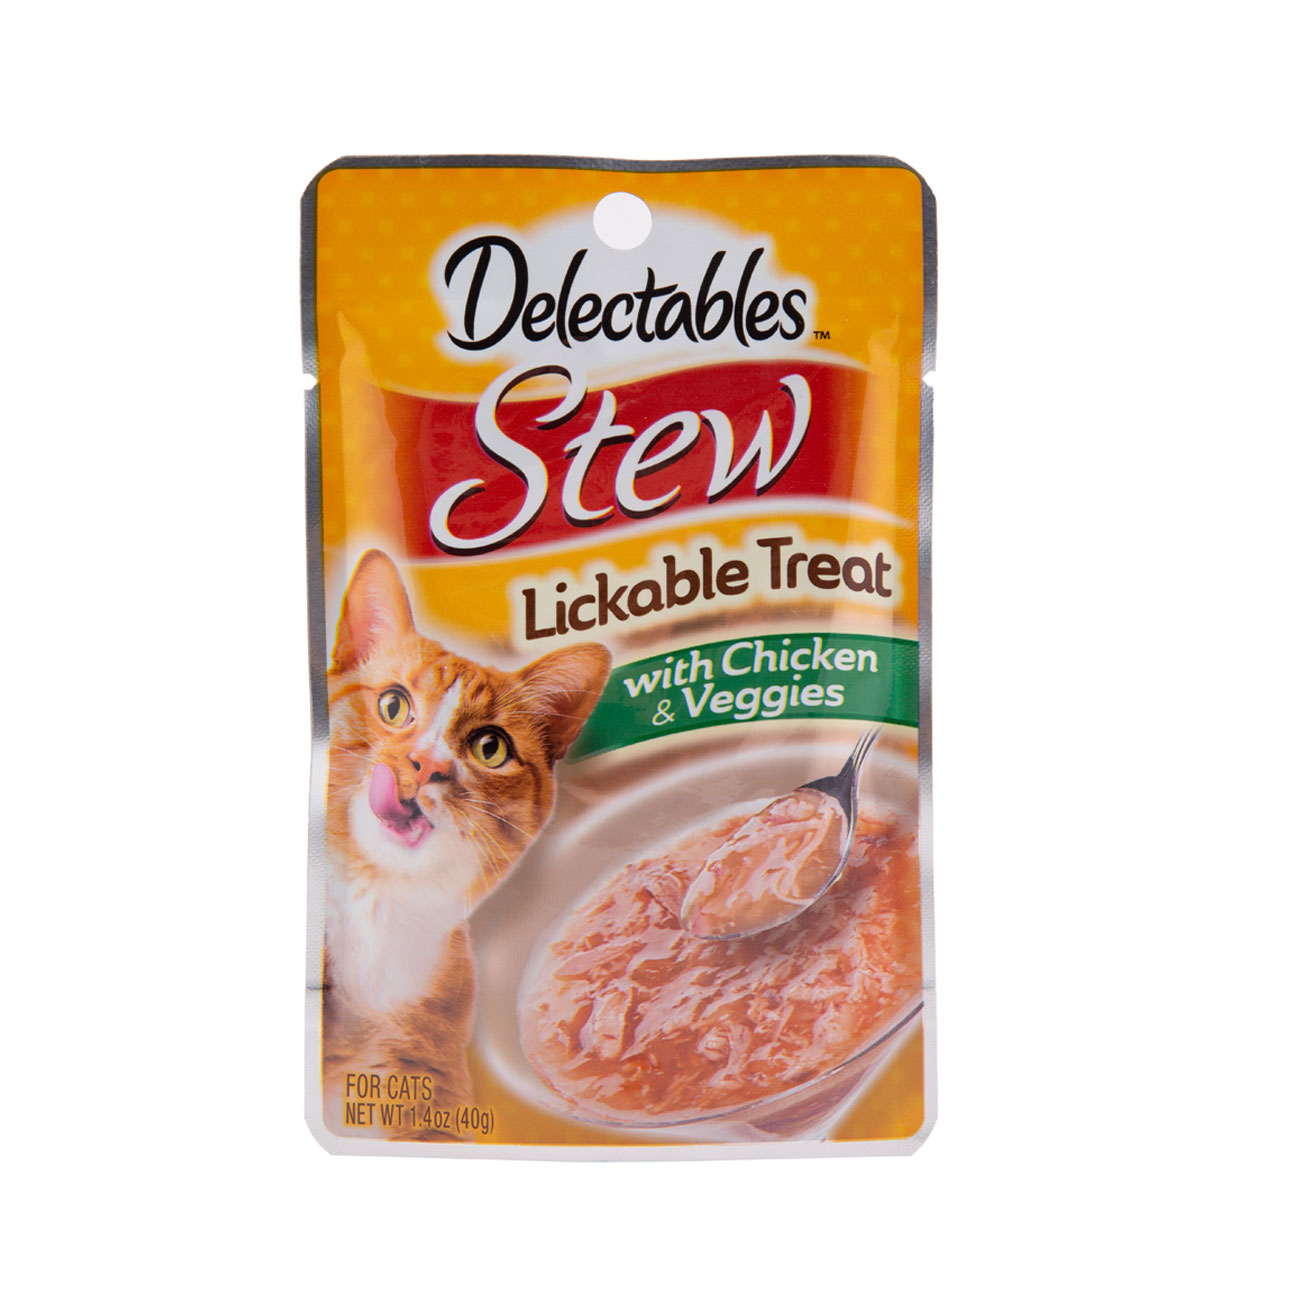 Hartz Delectables® Lickable Treat Stew with Chicken & Veggies. Front of package. Pictures are a cat and a cup of Delectables Lickable Treat Stew Chicken & Veggies